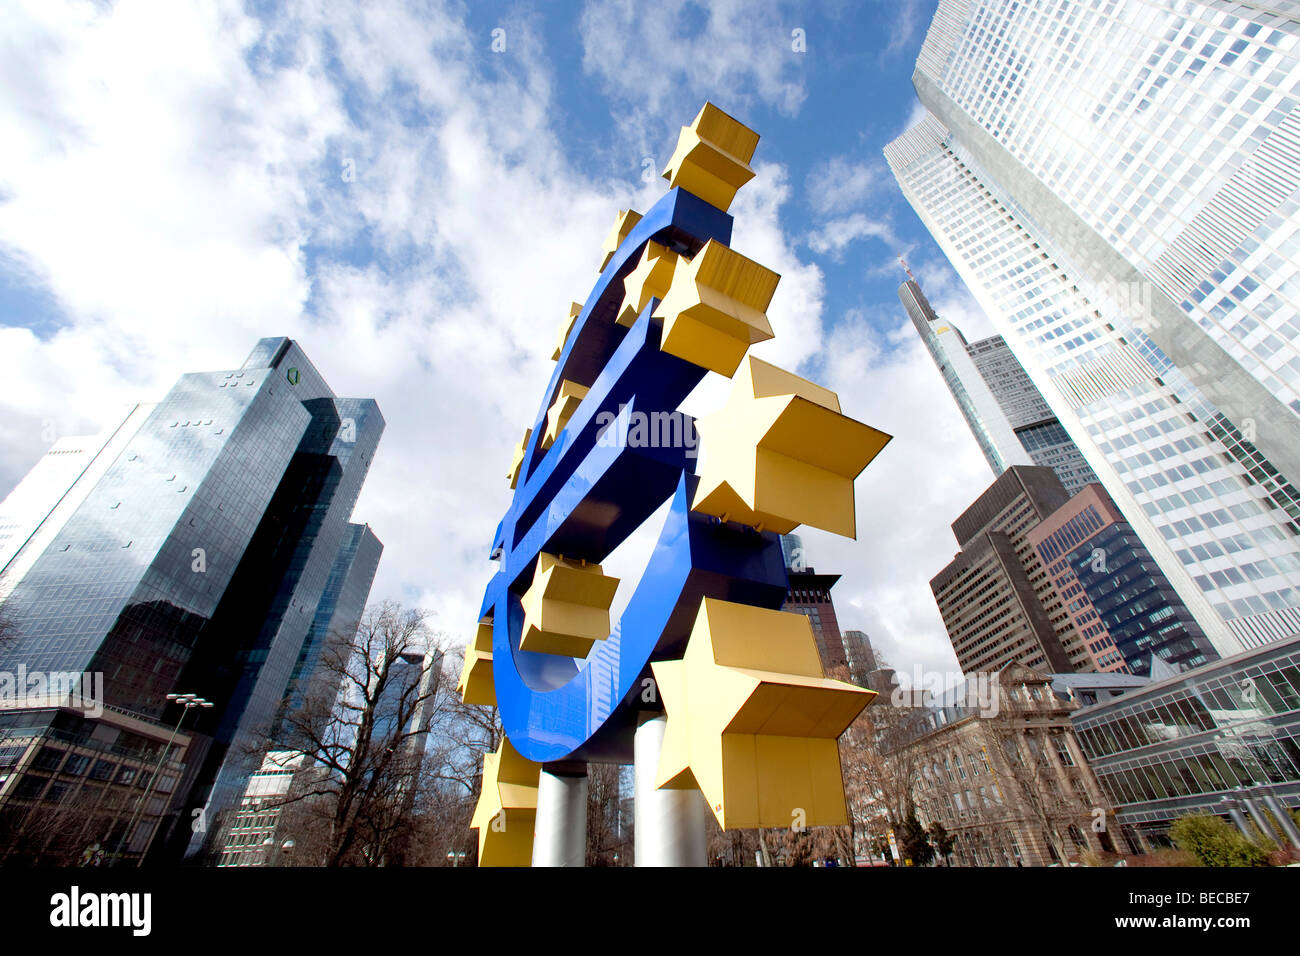 European Central Bank, right, with the euro symbol and Dresdner Bank, left, in Frankfurt am Main, Hesse, Germany, Europe Stock Photo